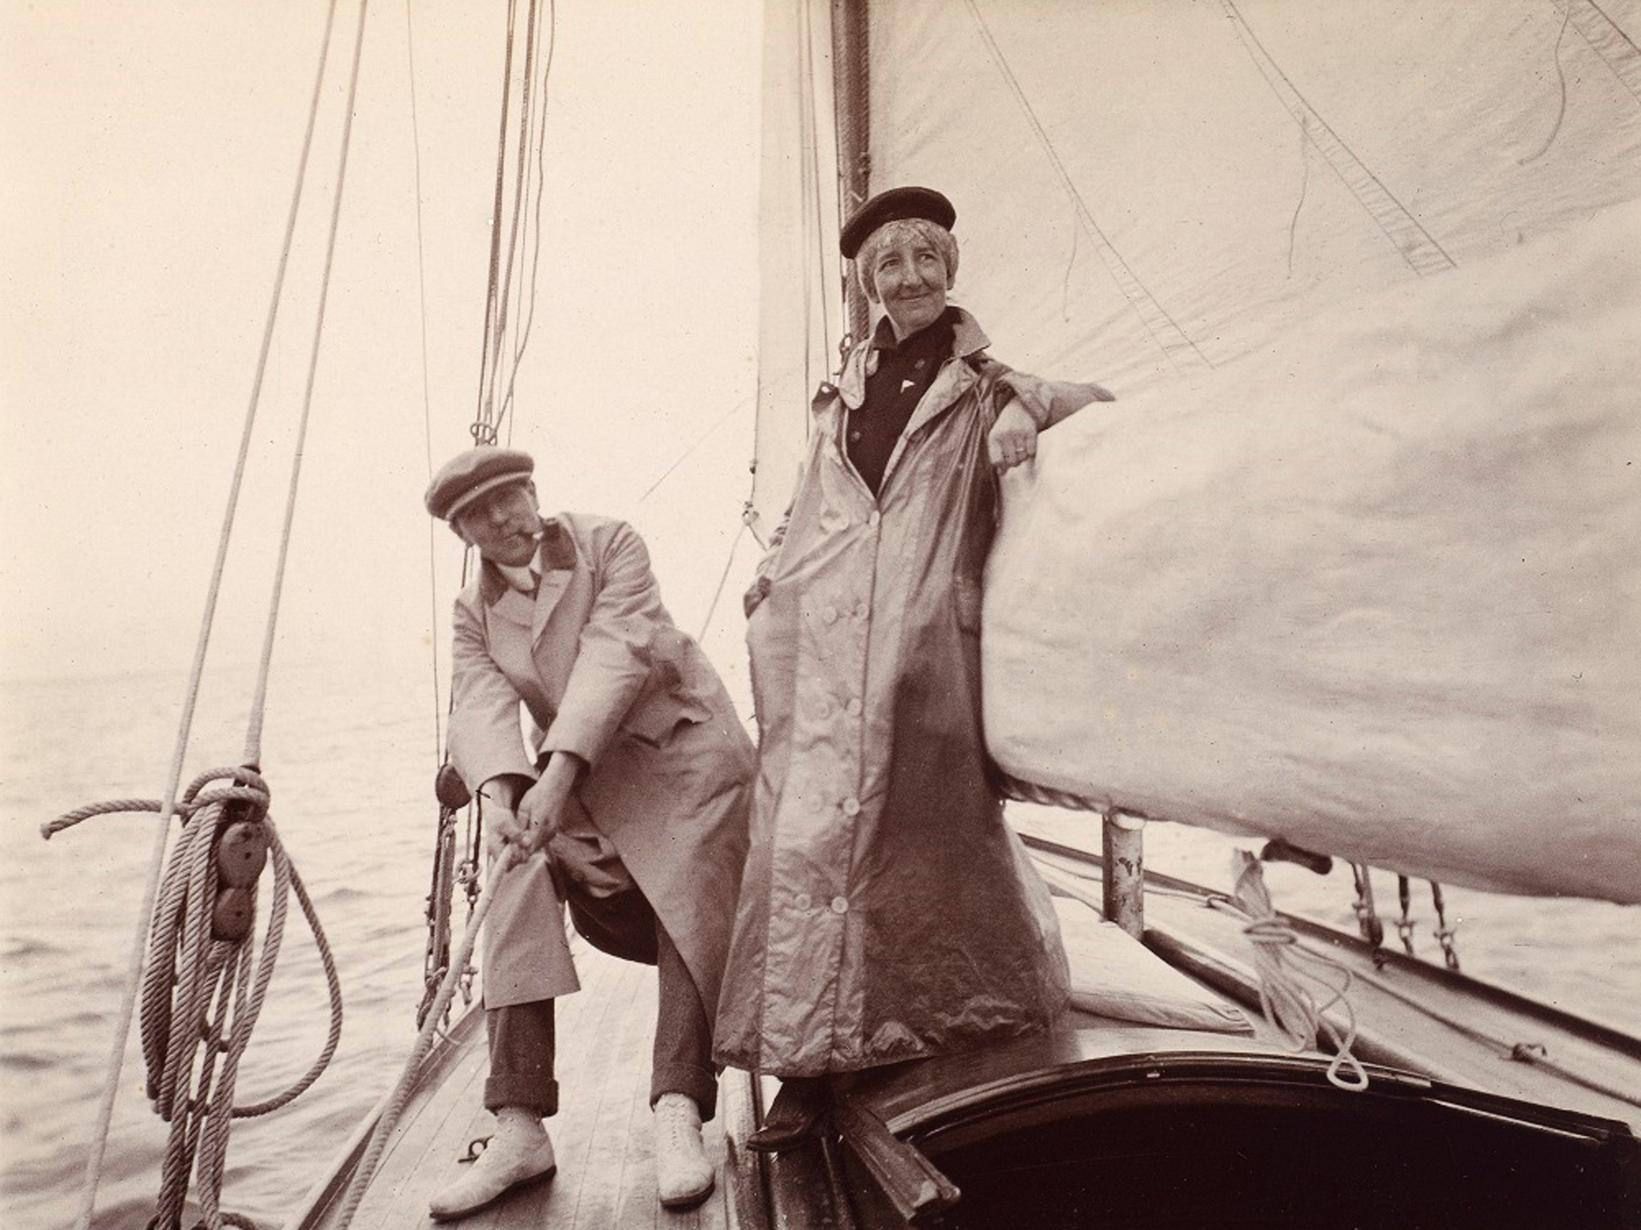 Trips off the west coast of Scotland became particularly fashionable in the early 20th Century with this couple pictured near Ayr.